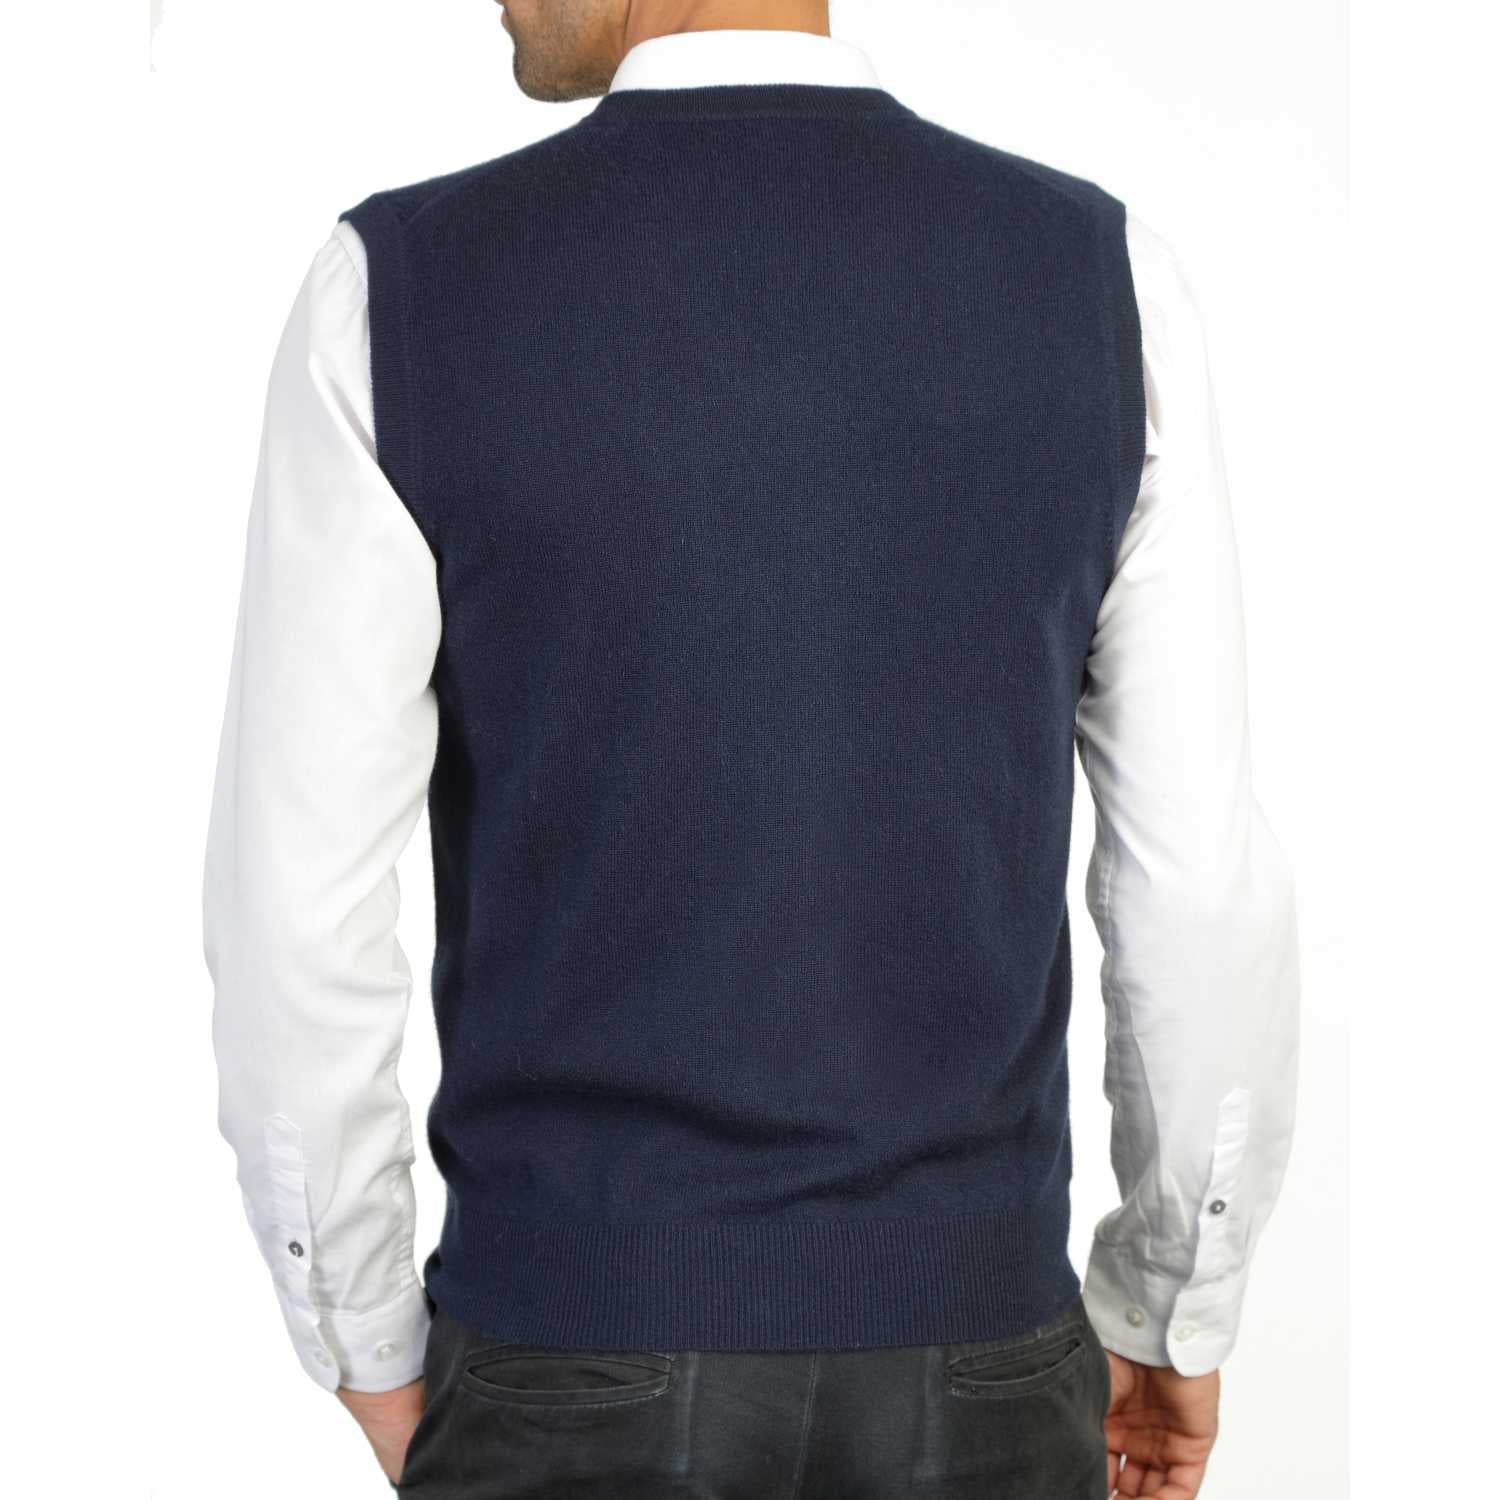 Mens Navy Blue Cashmere Sleeveless Vest Sweater | Back | Shop at The Cashmere Choice | London